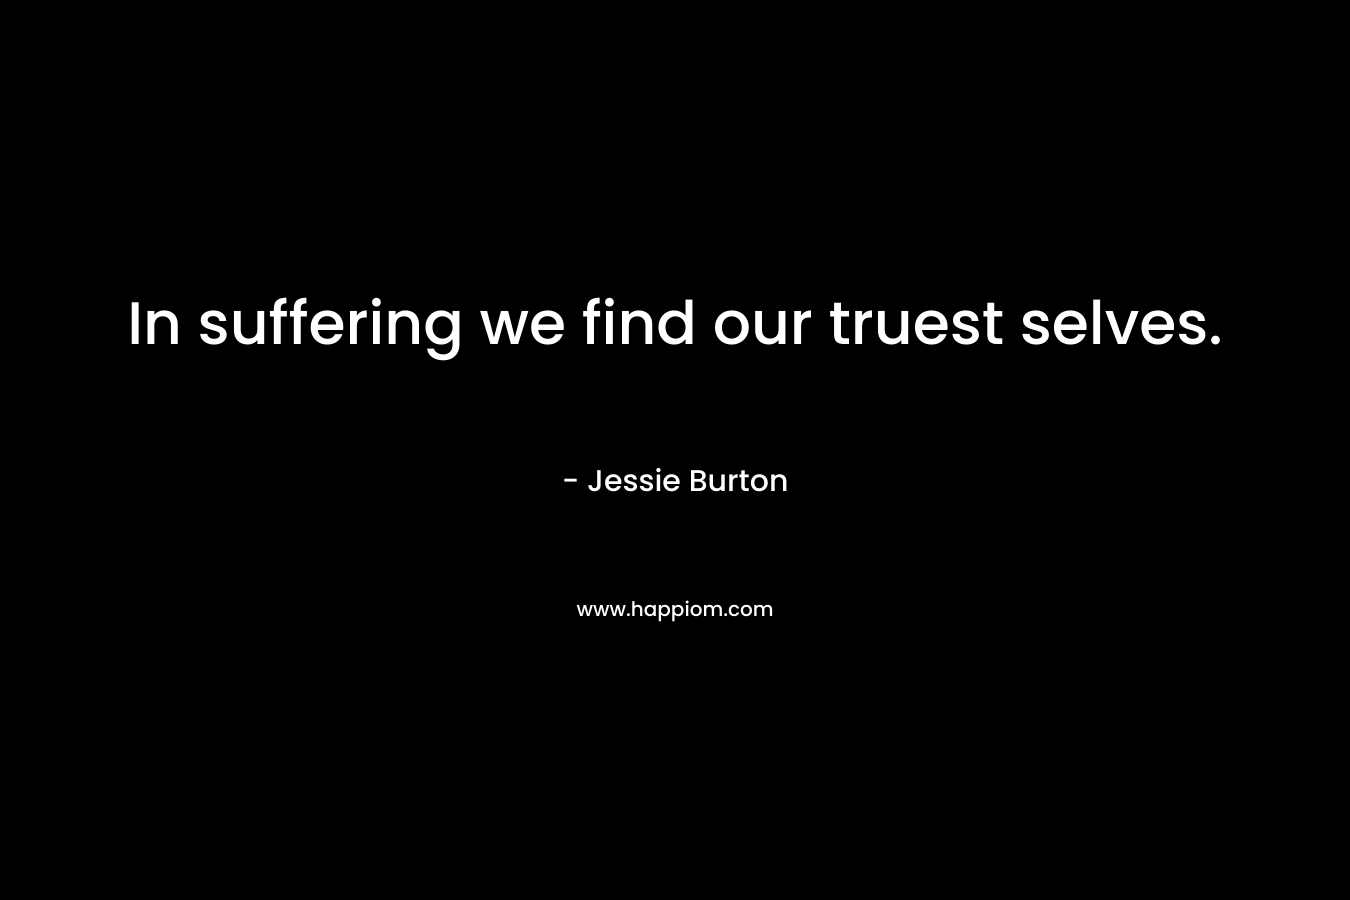 In suffering we find our truest selves.